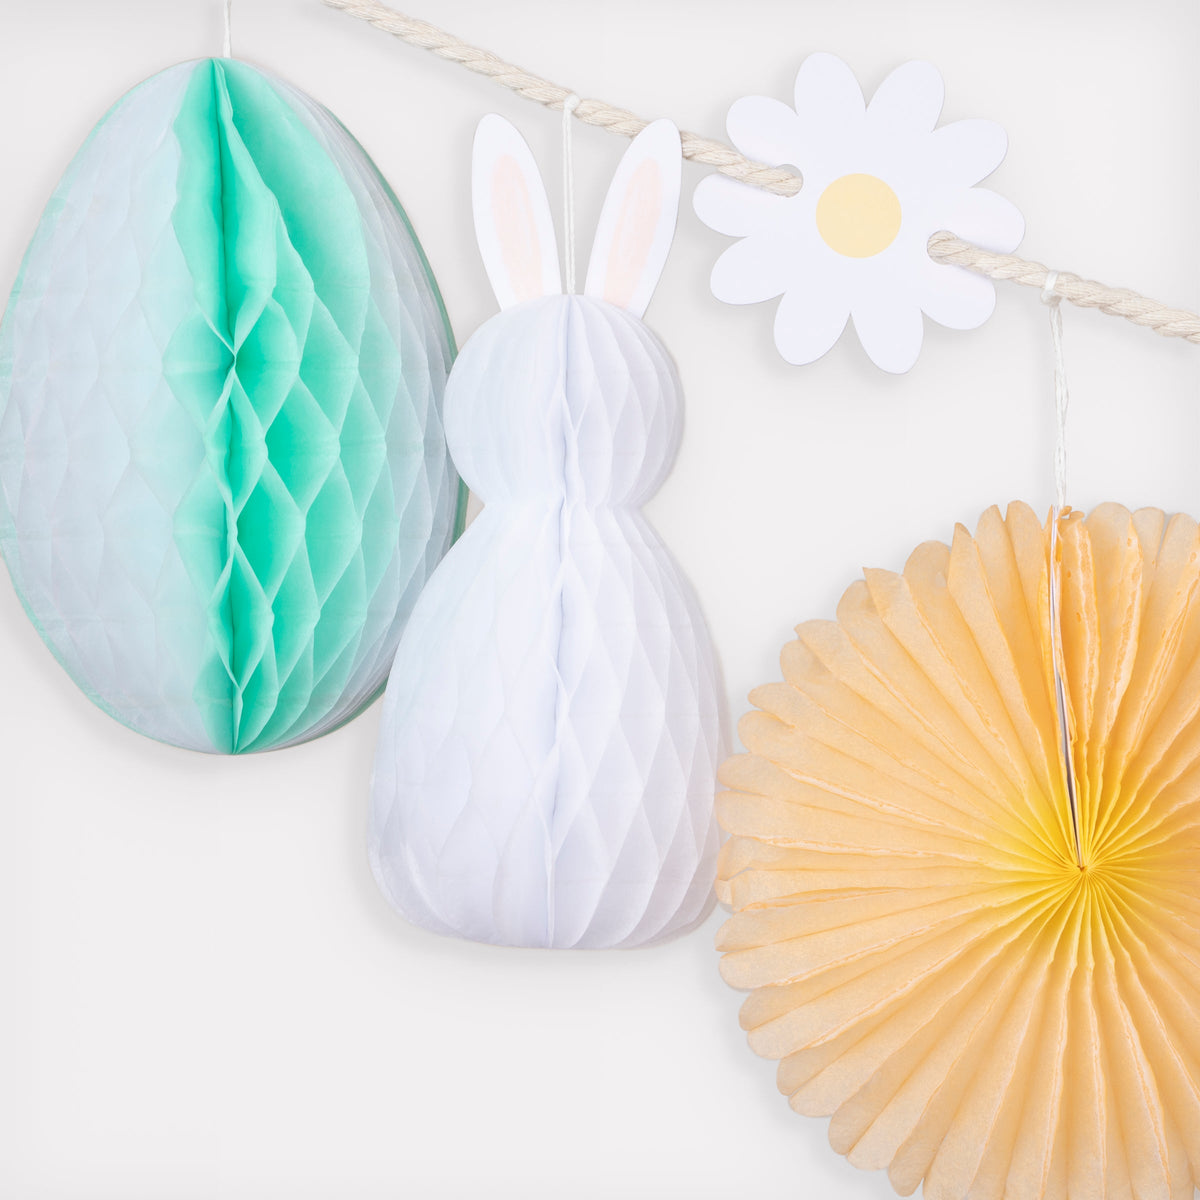 Easter Bunny with Egg Hanging Honeycomb Decorations – 6 Pc.